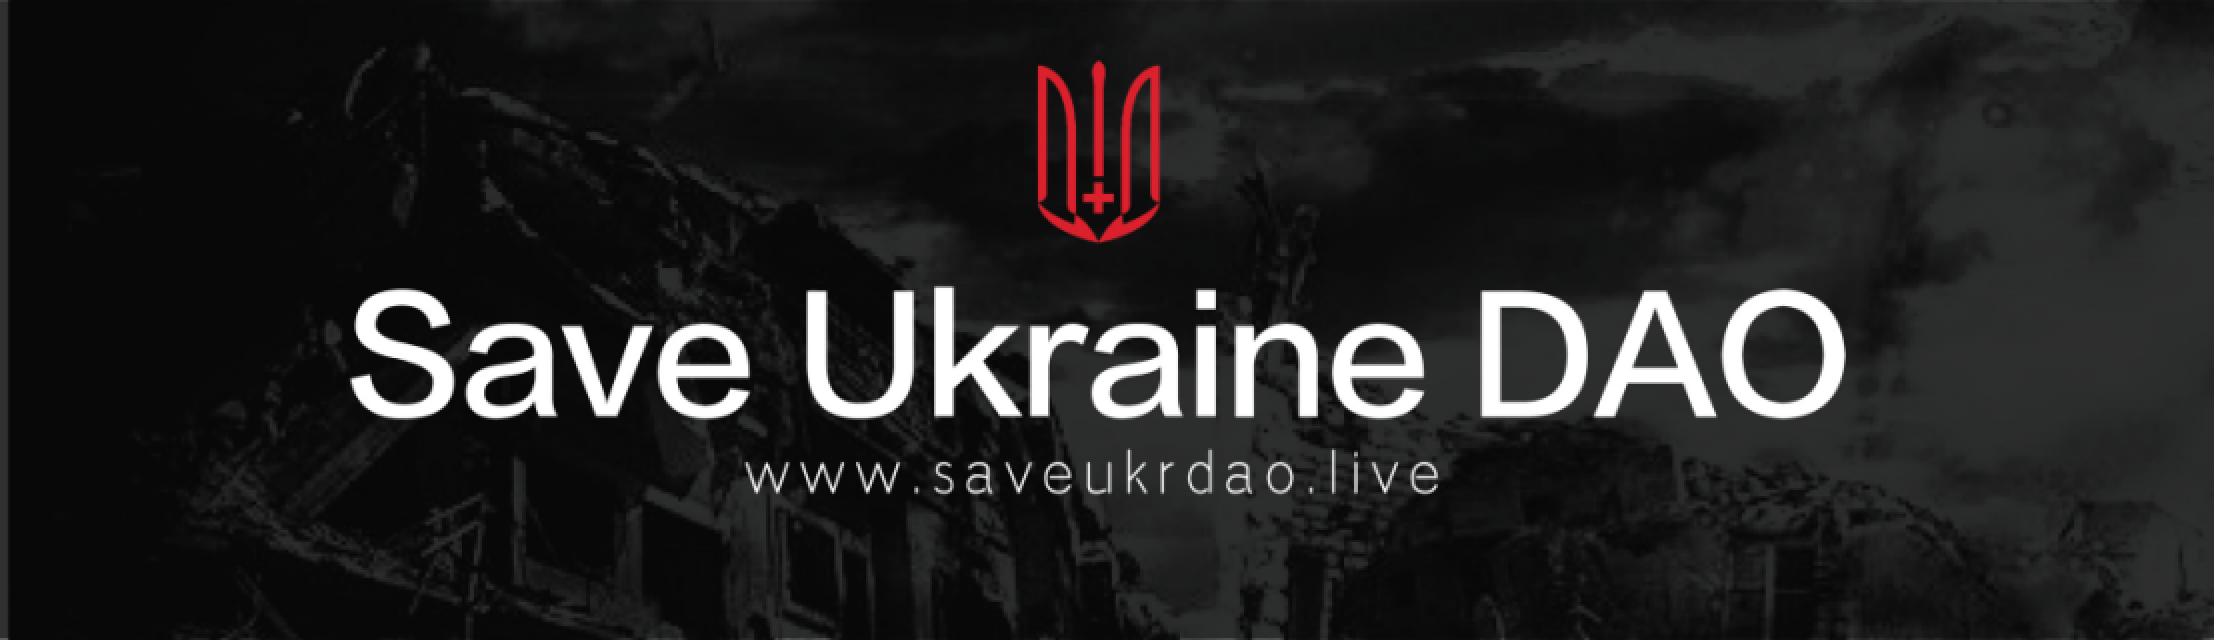  The Ukrainian-Russian conflict broke out, and the world’s first charity crypto, Save Ukraine DAO, was founded!